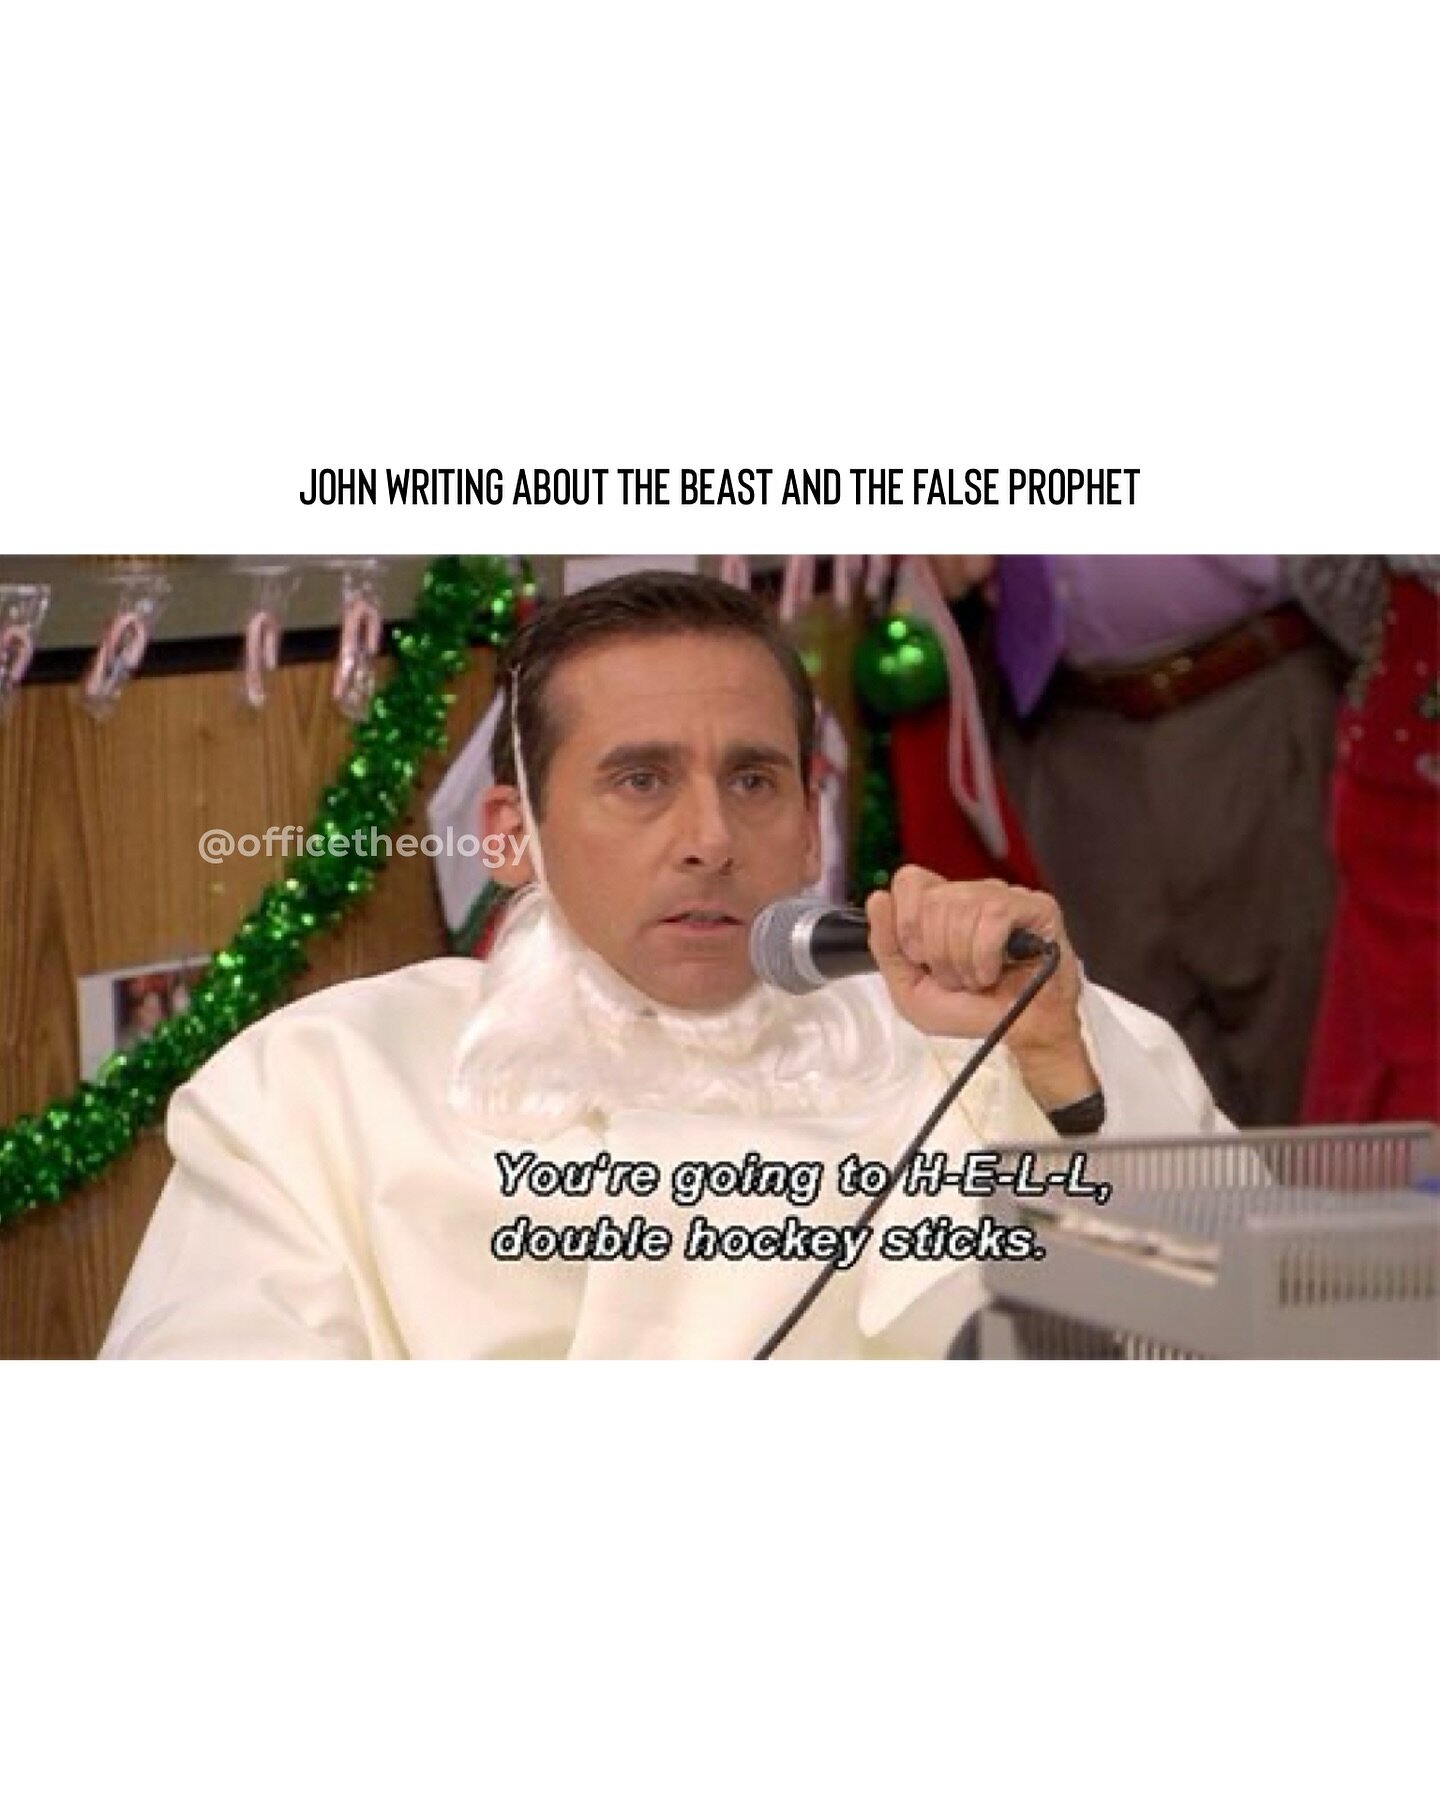 Sucks to suck. 
.
Follow @officetheology for daily memes. 
. 
.
.
.
.
.
.
.

#explore #office #theoffice #theofficememes #theos #bible #christianitv #christian #christianmemes #christianmeme #funny #explorepage #nbc #theology #theologymatters #theolo